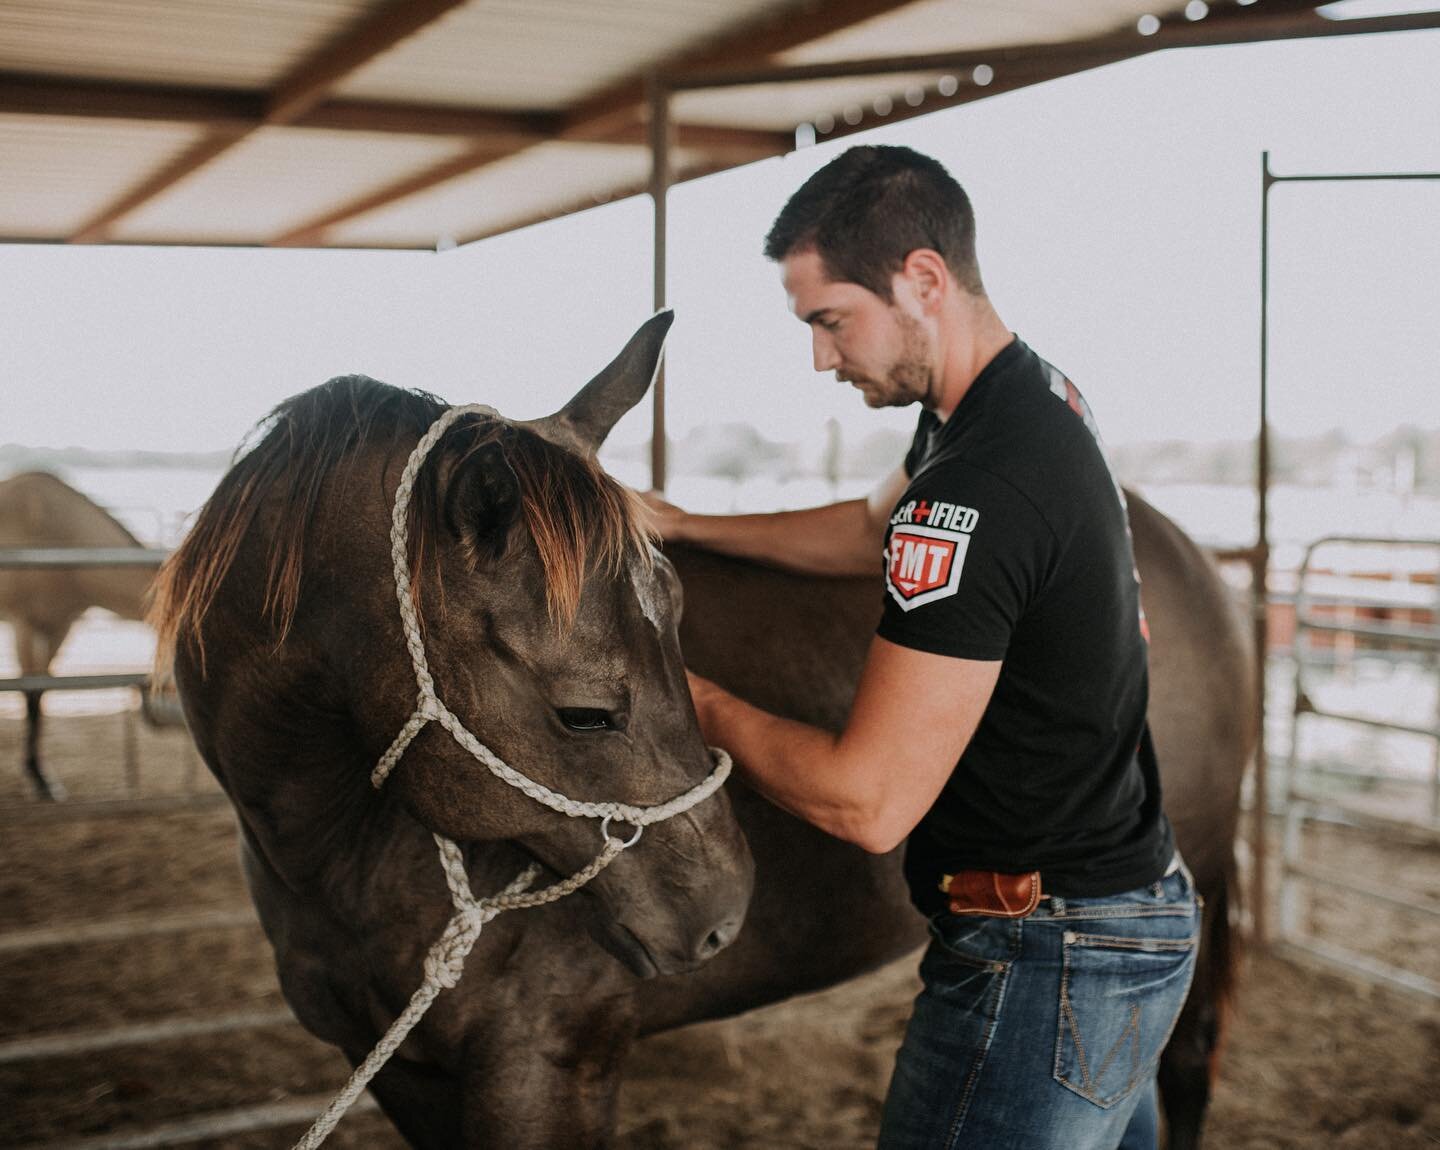 Heading down to Houston to work on some show animals! Making sure they feel in tip top shape just in time for the Houston Livestock Show👏🏻 ⁣
⁣
#houston #houstonlivestockshowandrodeo #showanimals #ffa #4h #chiro #animalchiro#animal #horse #horsesofi